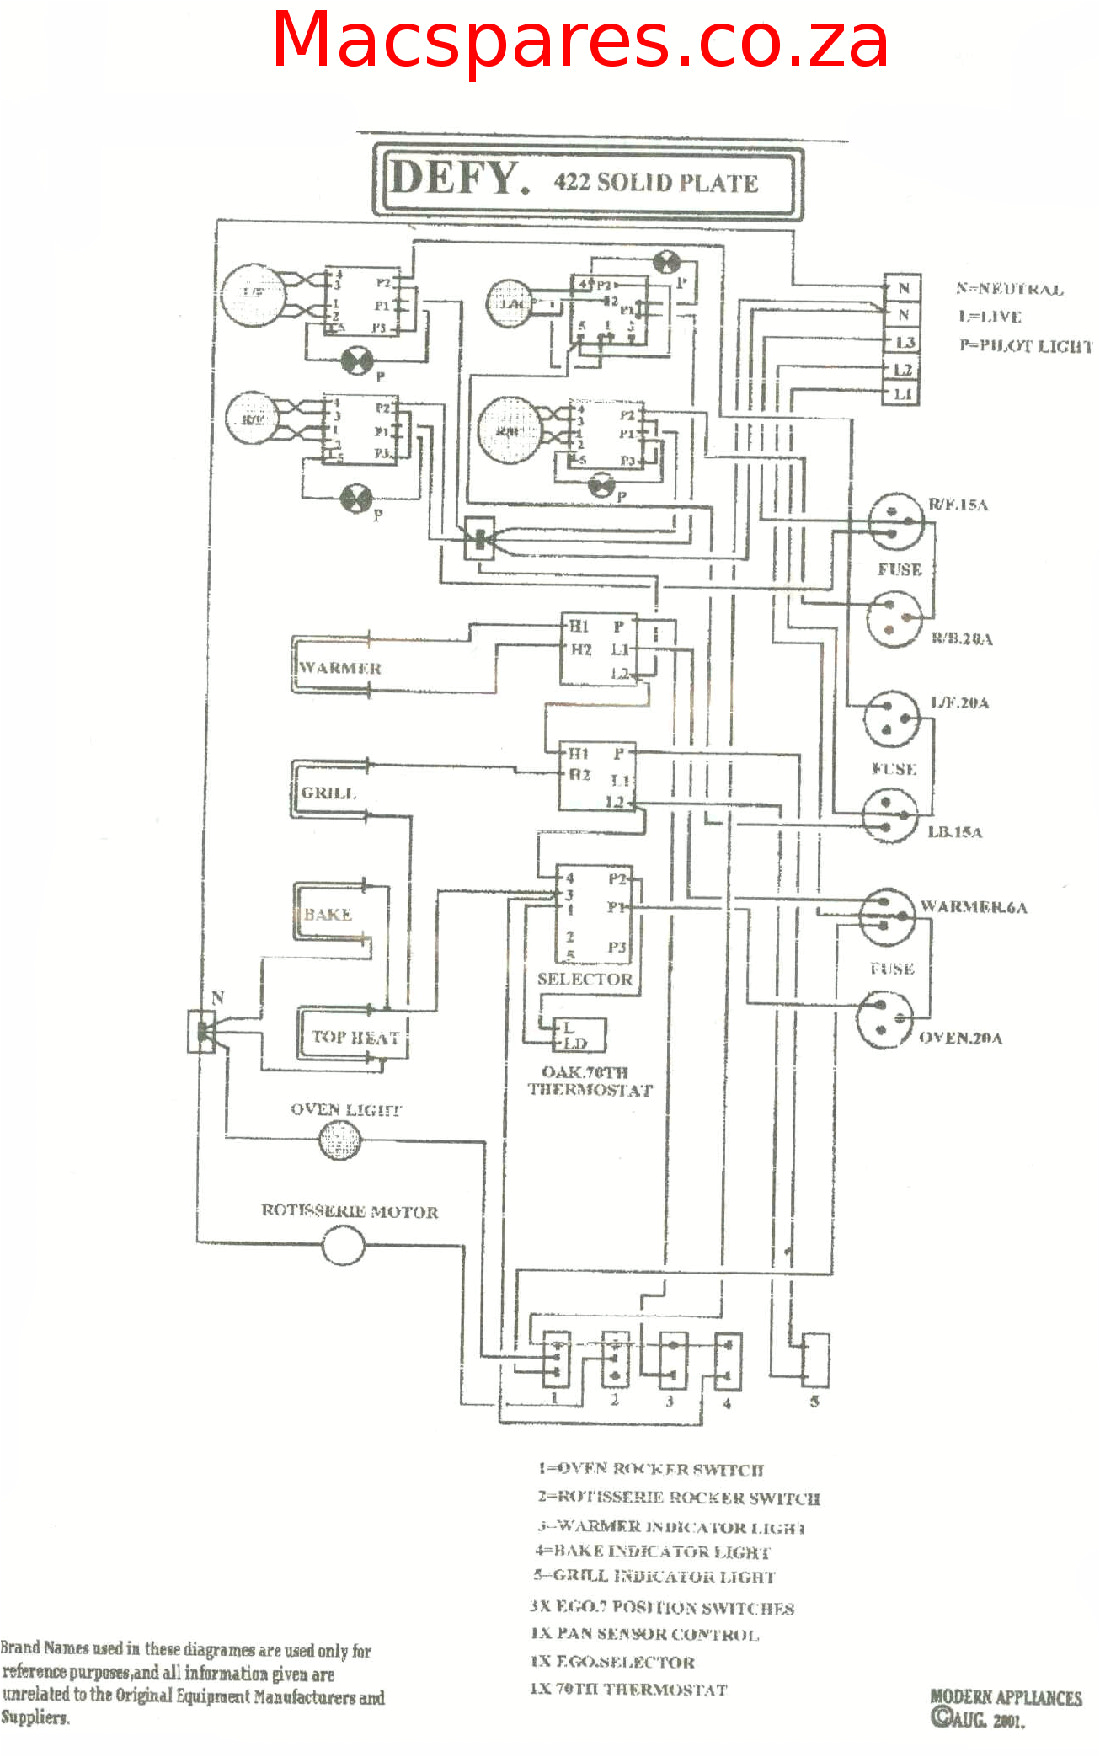 defy gemini oven wiring diagram awesome stoves defy wiring diagram collection 1 jpg